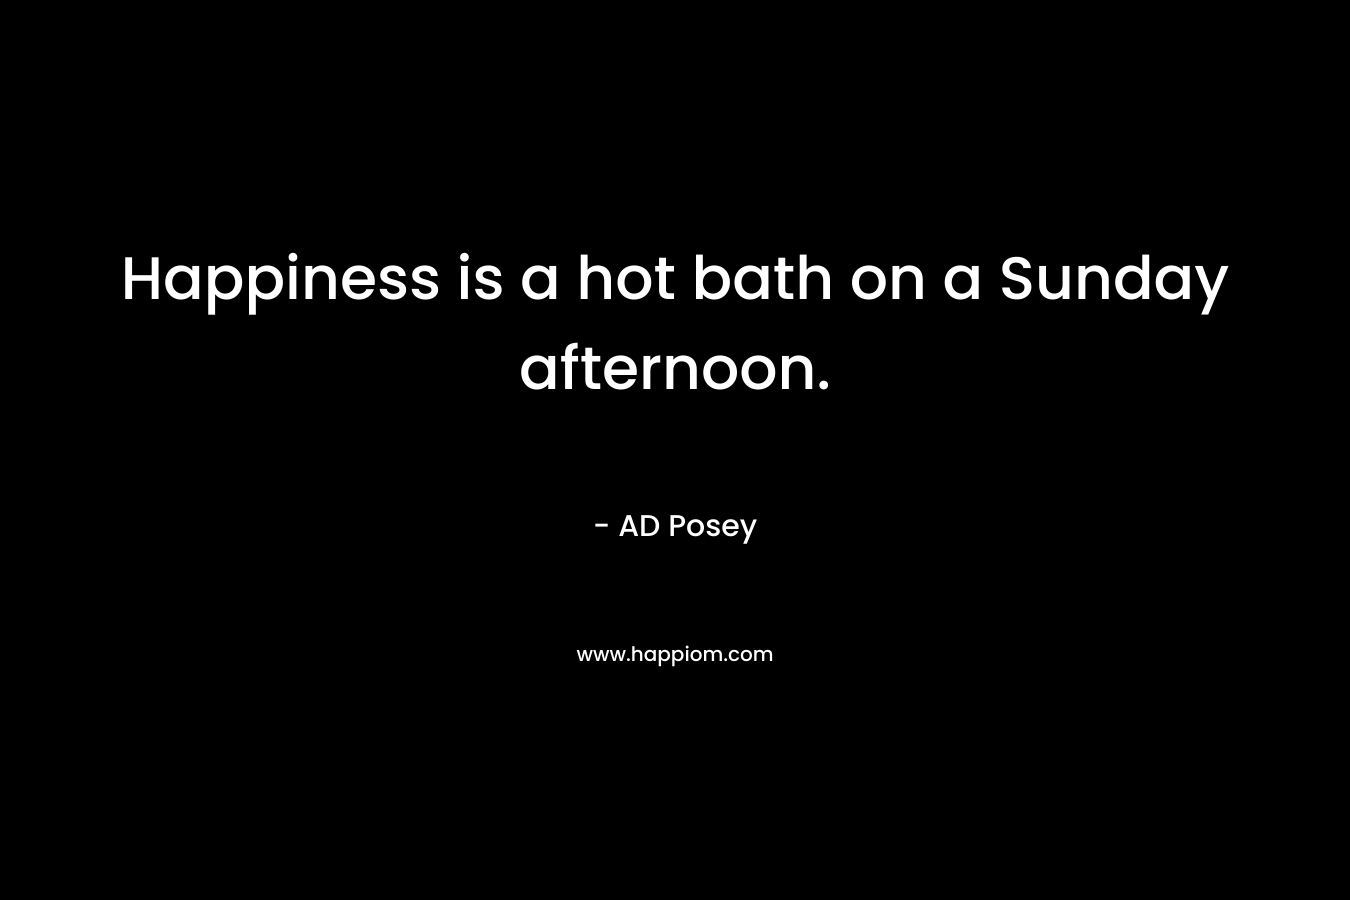 Happiness is a hot bath on a Sunday afternoon. – AD Posey